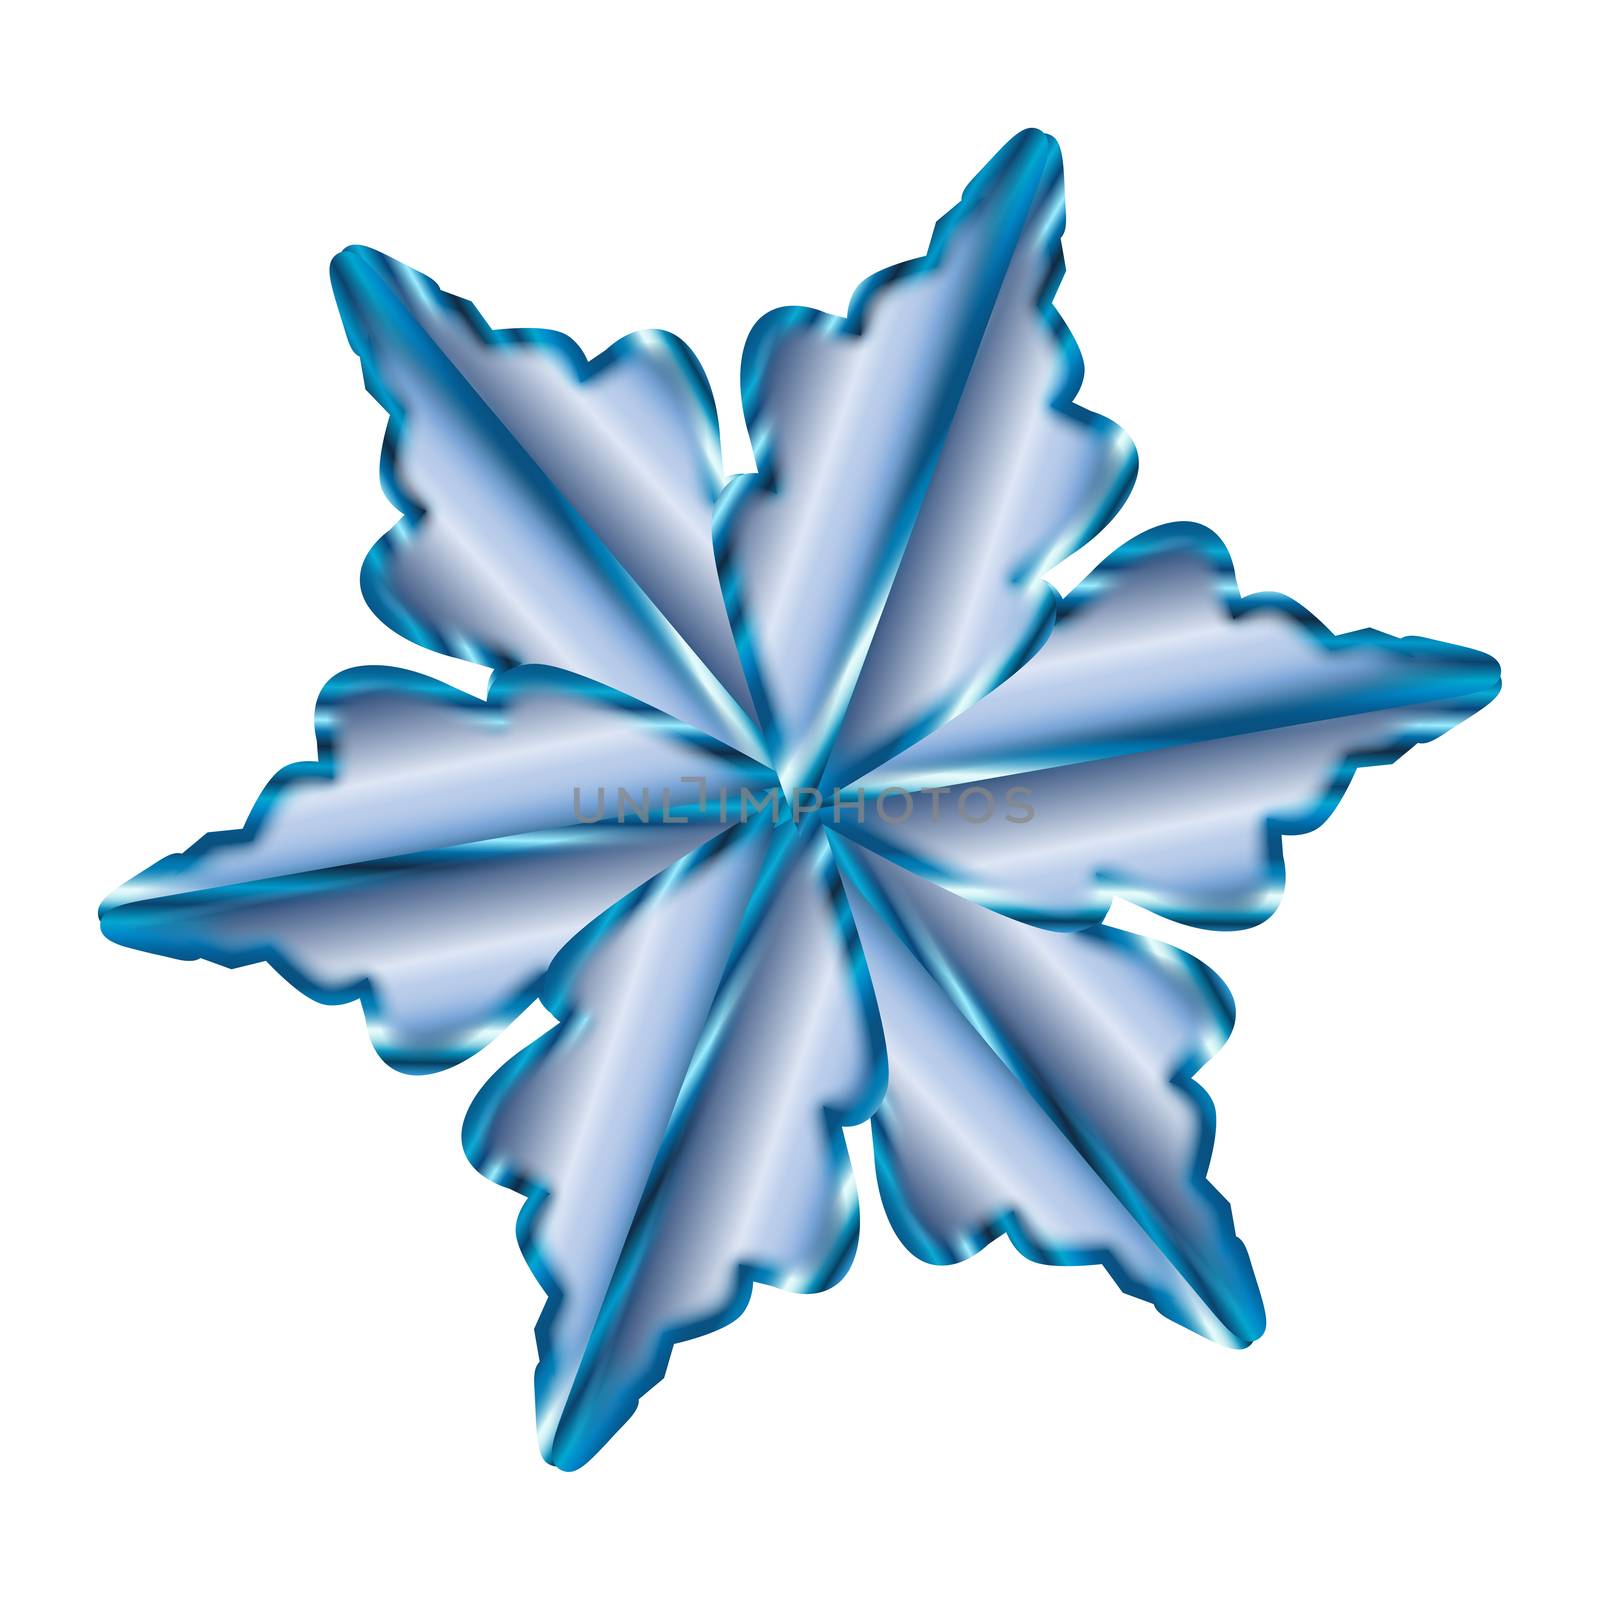 a single snowflake in blue over a white background